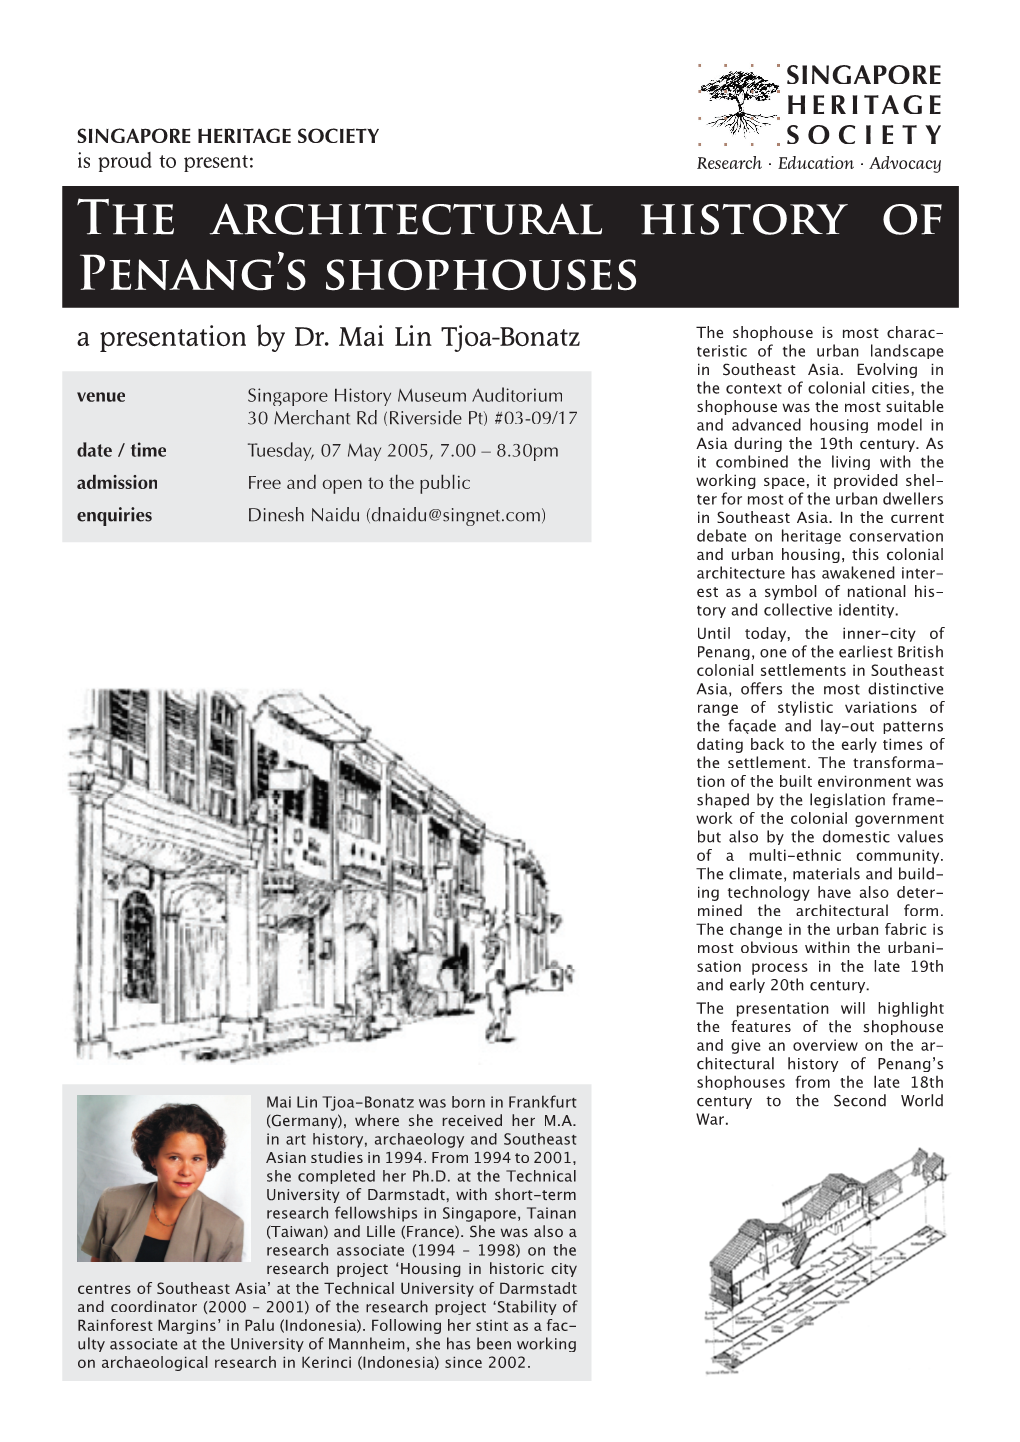 The Architectural History of PENANG's Shophouses